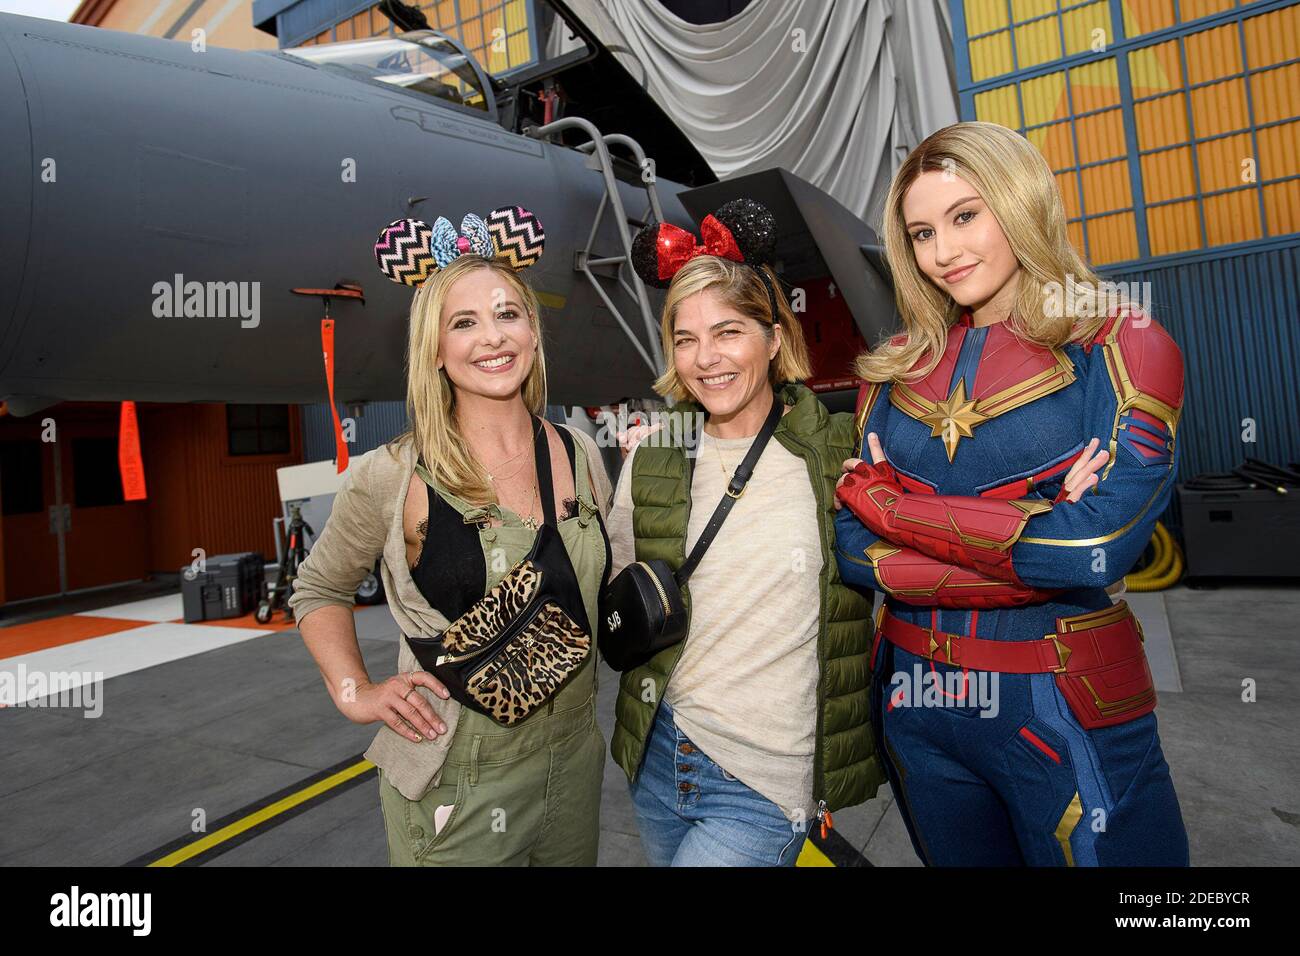 HANDOUT - Actresses and friends Sarah Michelle Gellar (left) and Selma Blair share a special moment with Captain Marvel at Disney California Adventure Park in Los Angeles, CA, USA, on March 28, 2019. The friends were celebrating over 20 years of friendship while visiting Disneyland Resort. Photo supplied by Richard Harbaugh/Disneyland Resort/ABACAPRESS.COM Stock Photo